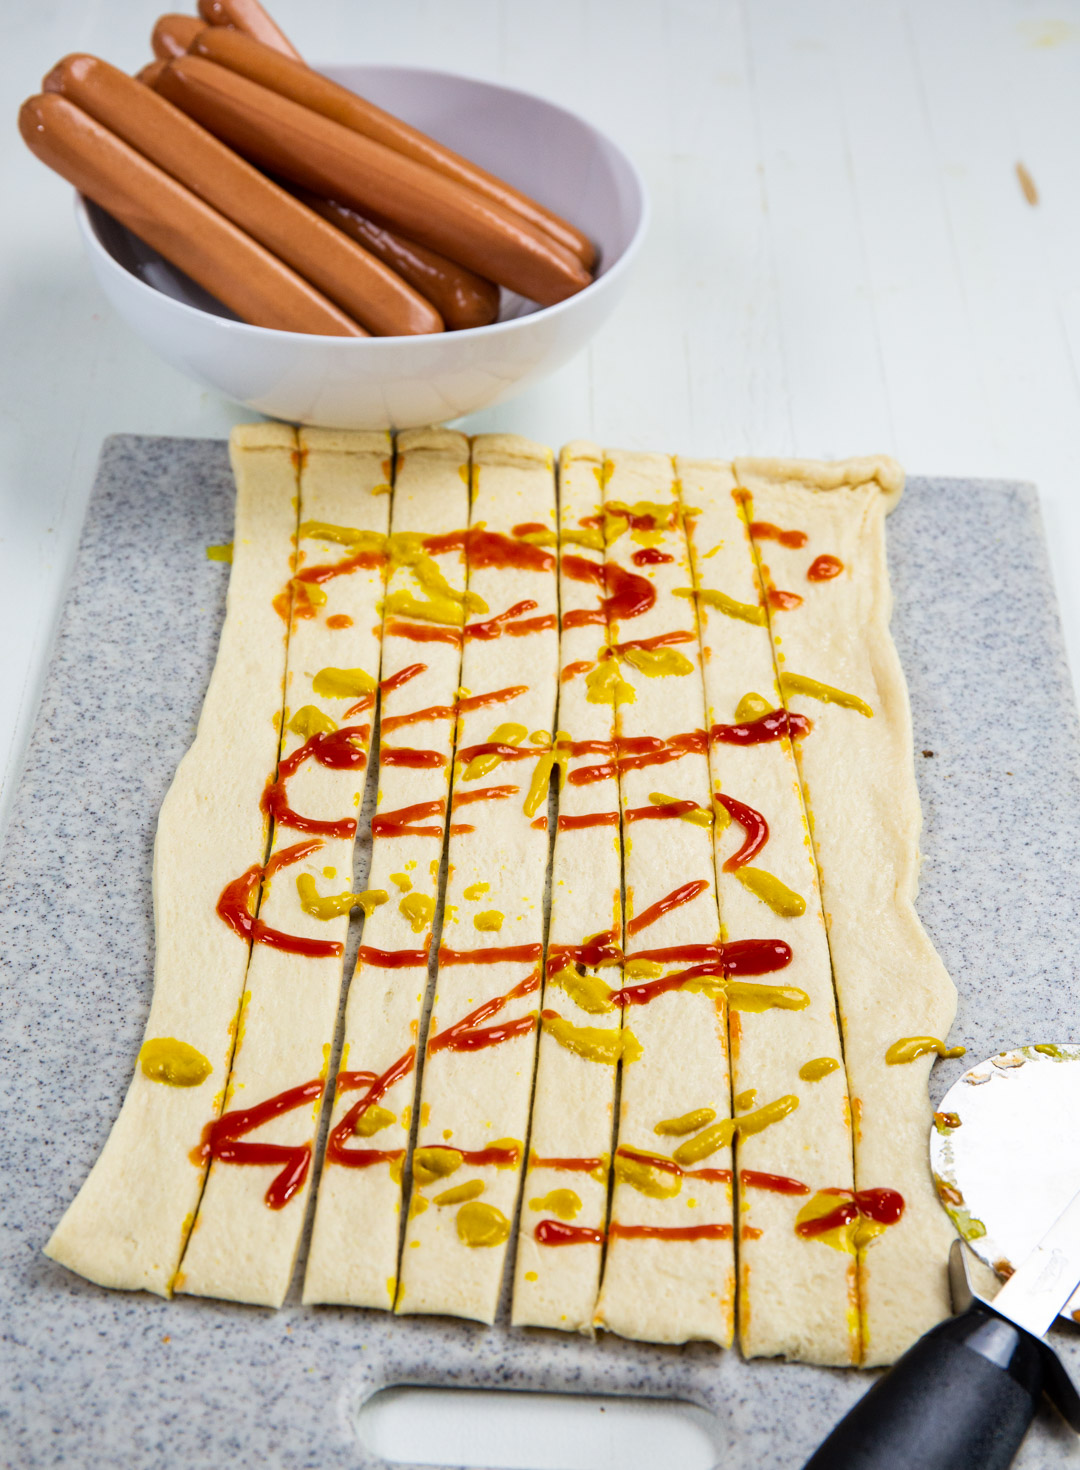 Ketchup and mustard spread on crescent dough.